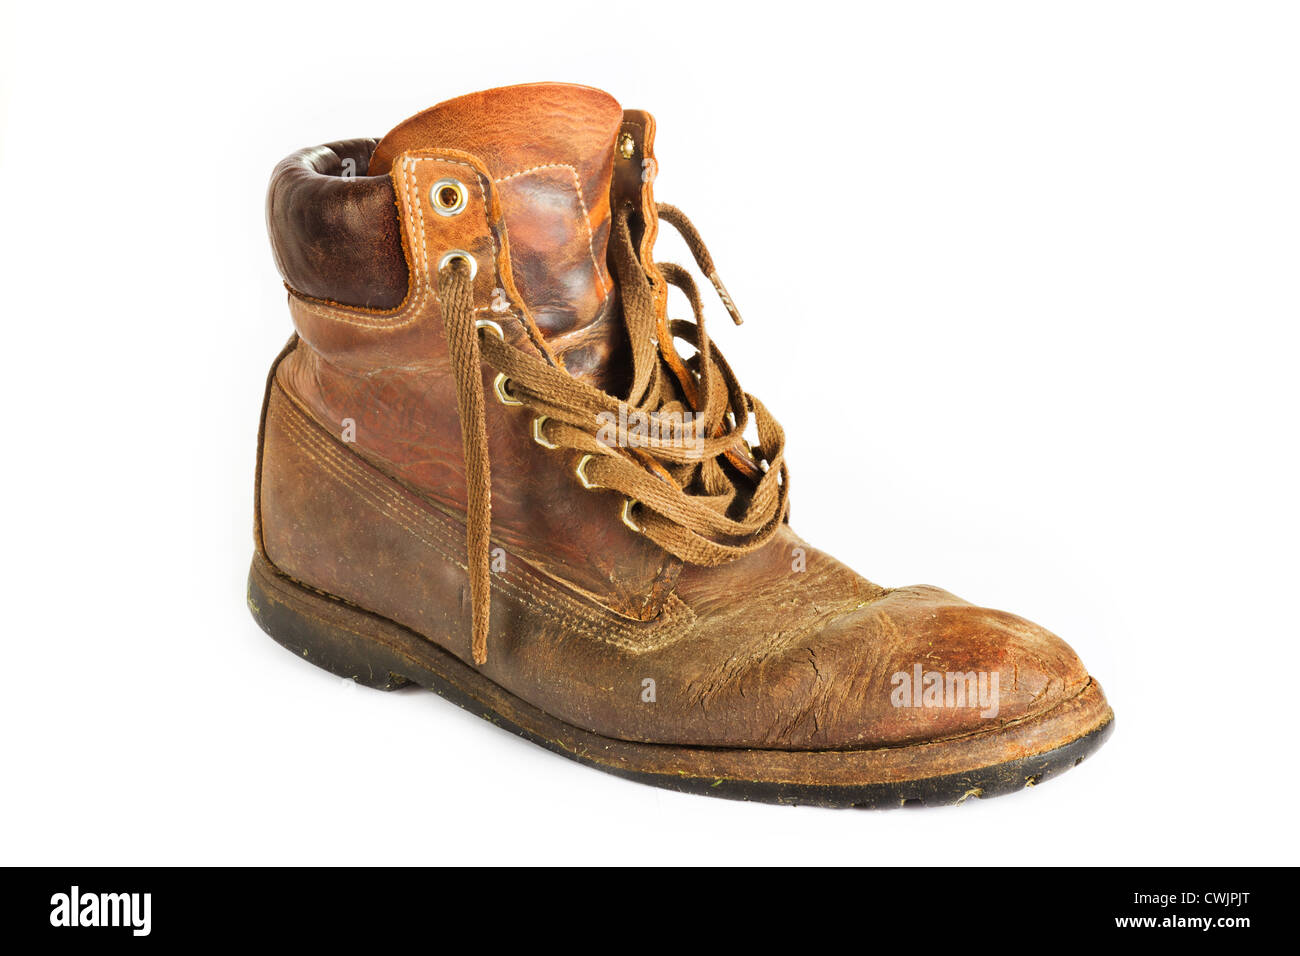 Old worn brown leather work boot on white Stock Photo